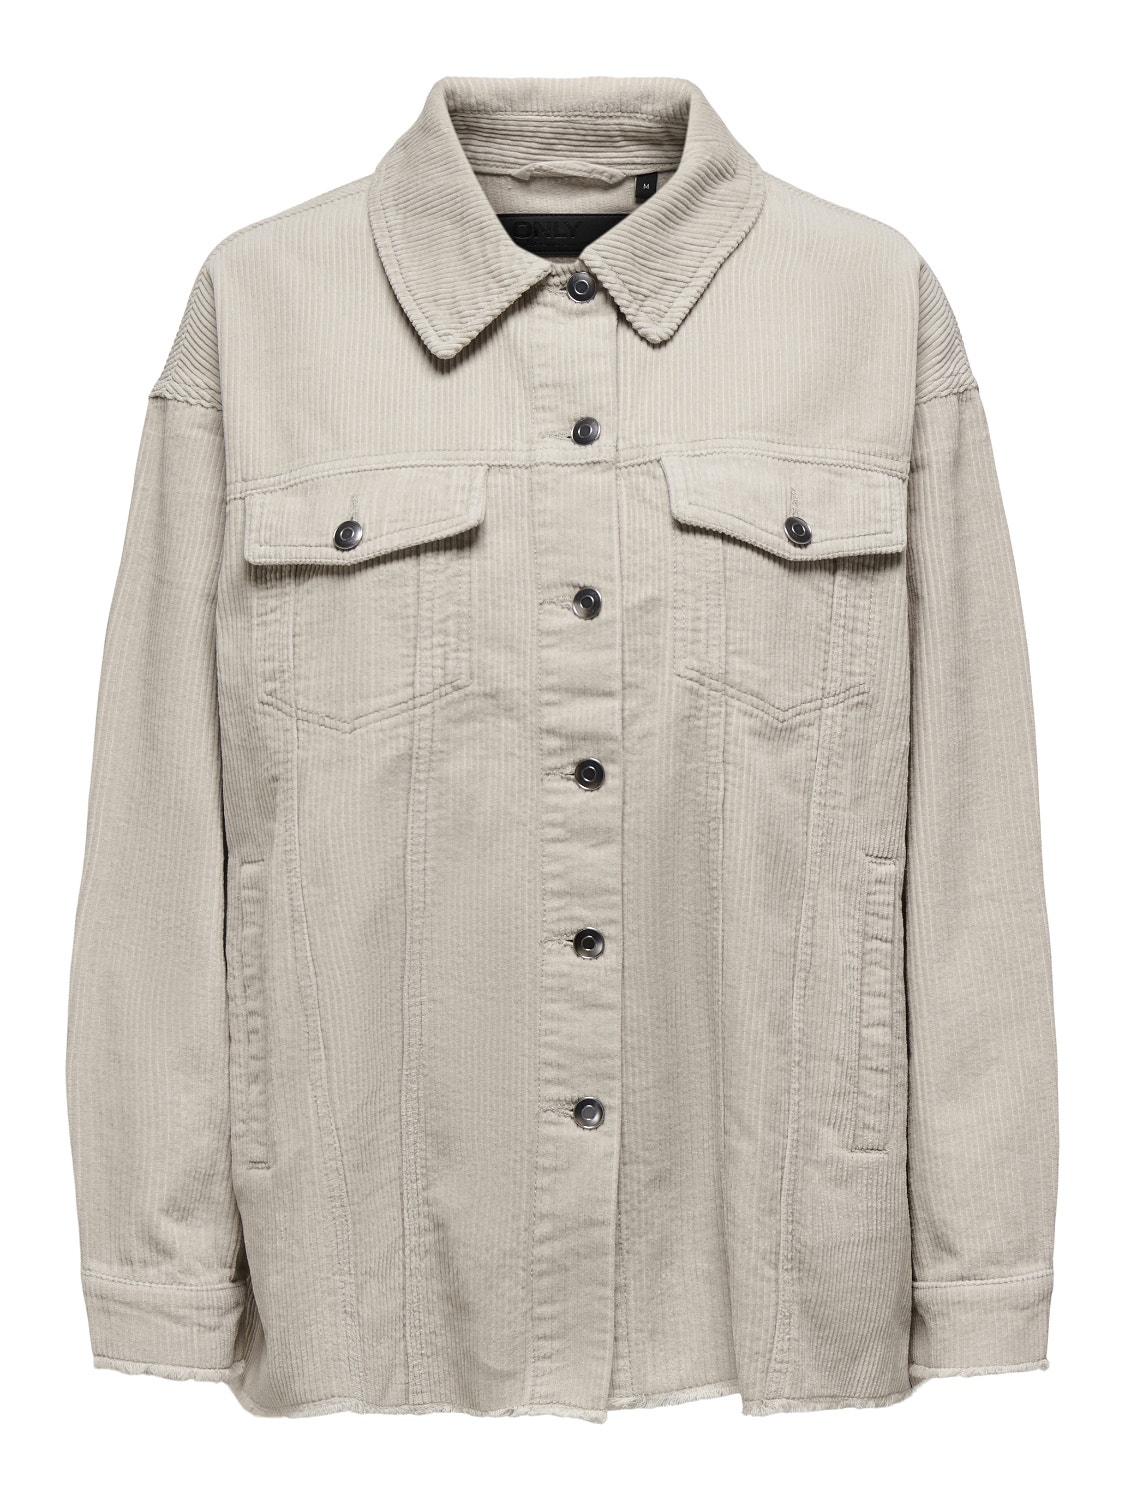 ONLY Corduroy overshirt -Silver Lining - 15182101